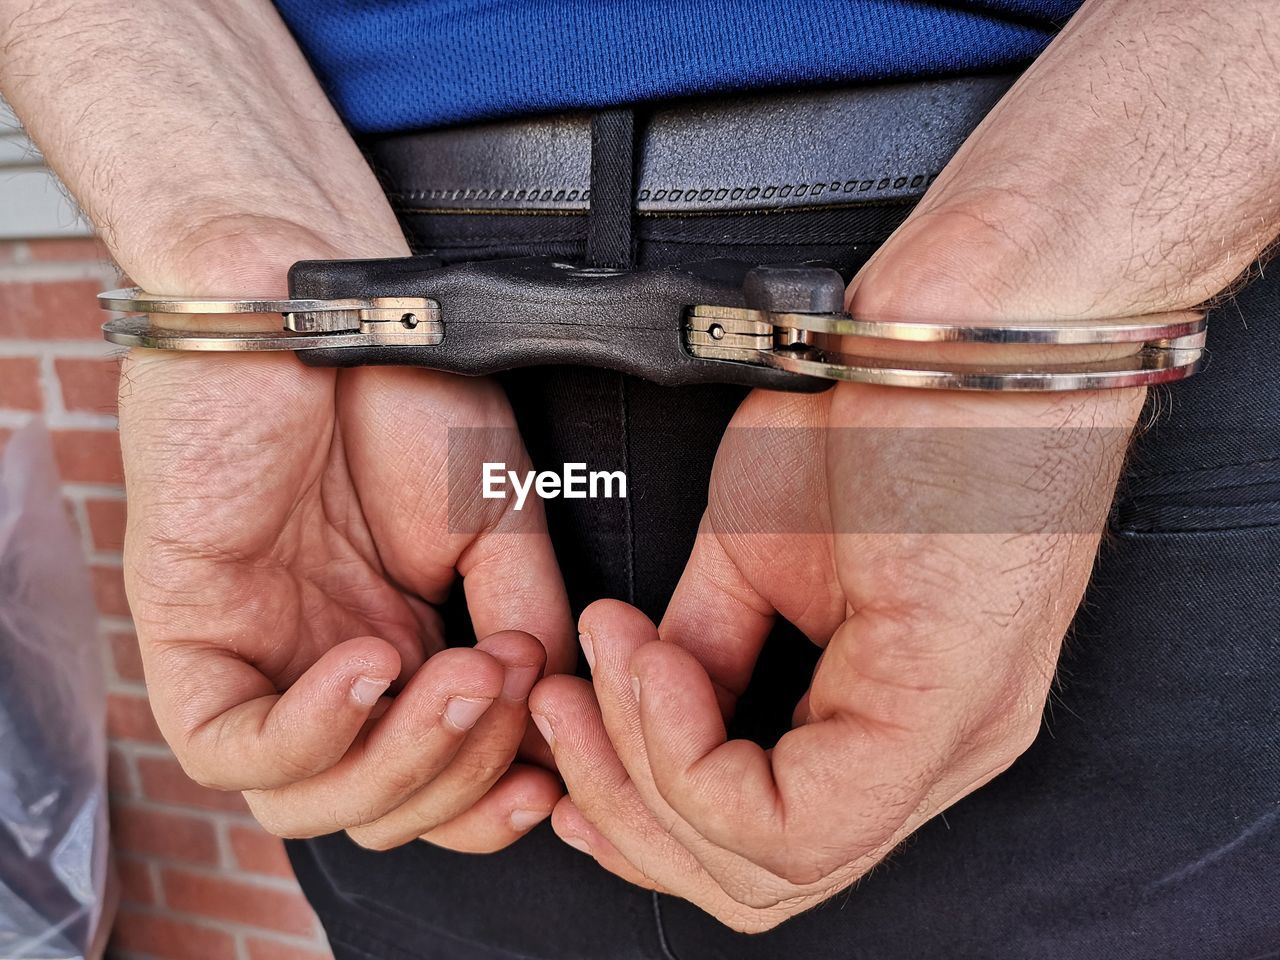 Midsection rear view of criminal wearing handcuffs